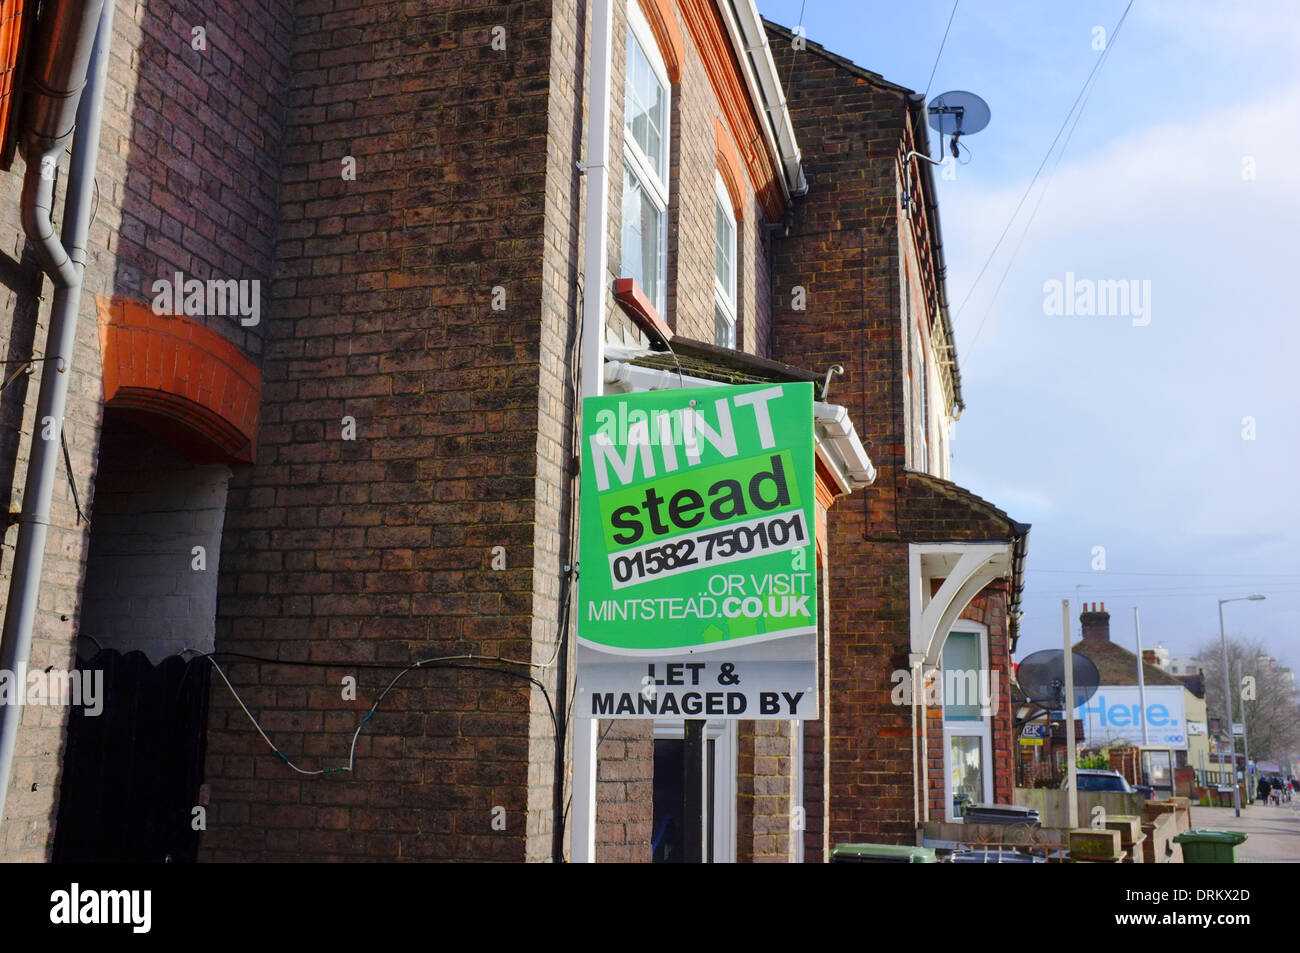 Mint stead Rental property sign on house in Luton Stock Photo